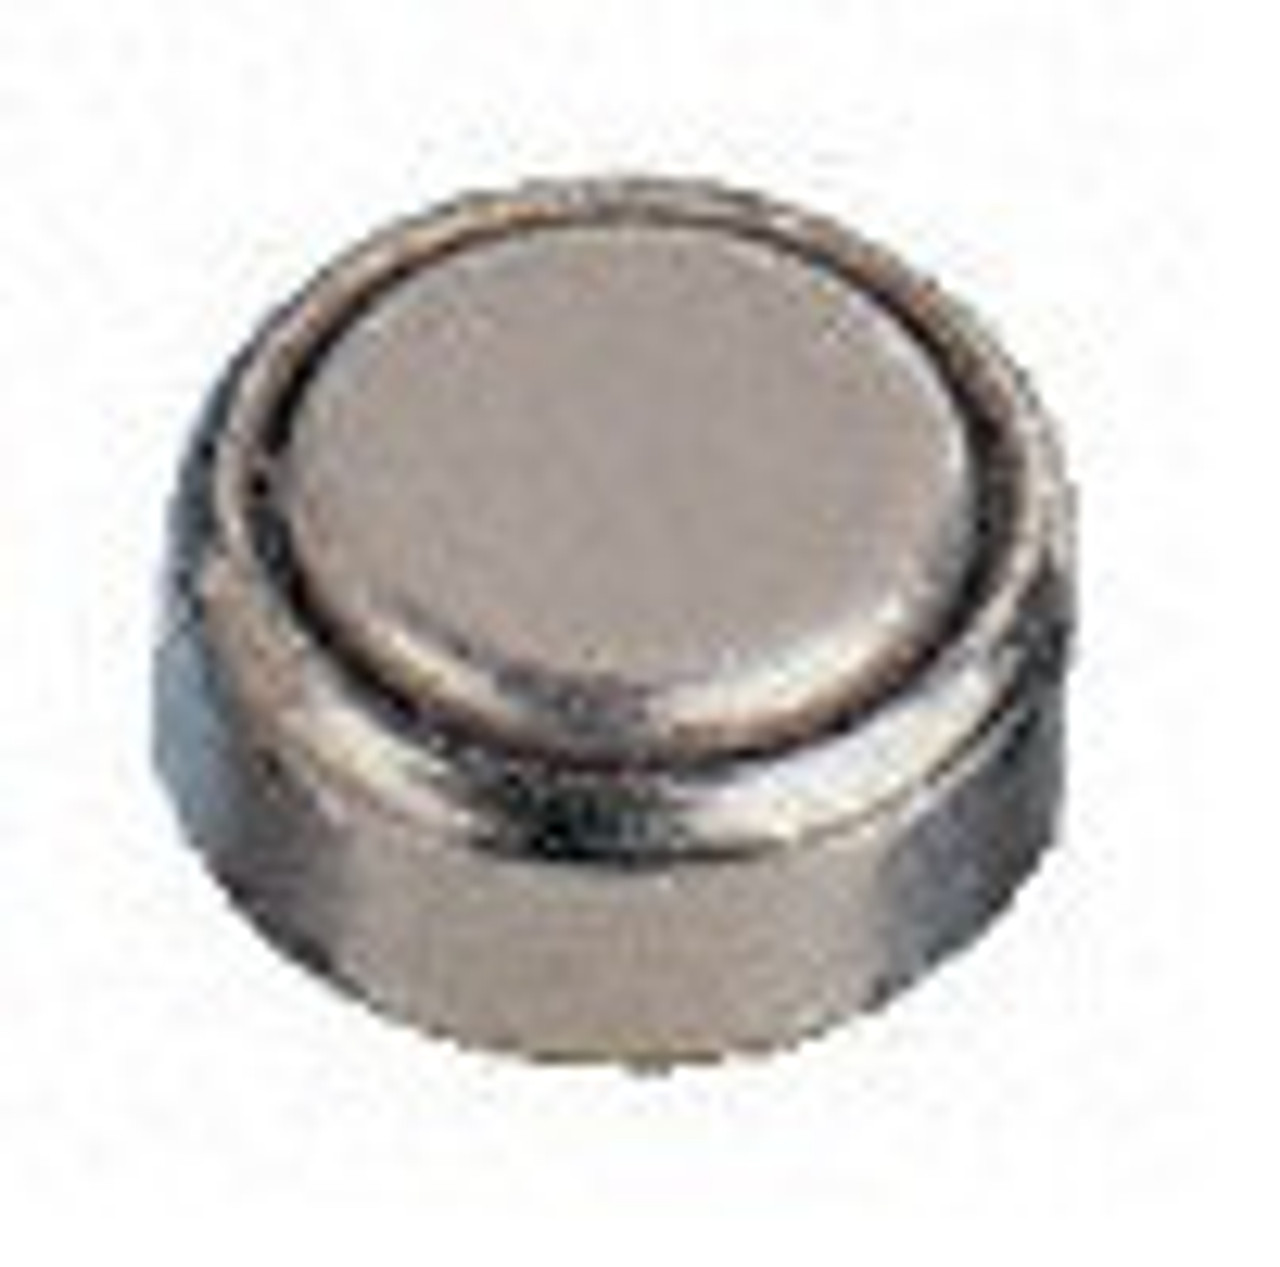 BBW AG7 / LR927 Alkaline Button Watch Battery 1.5V - 100 Pack - FREE SHIPPING 